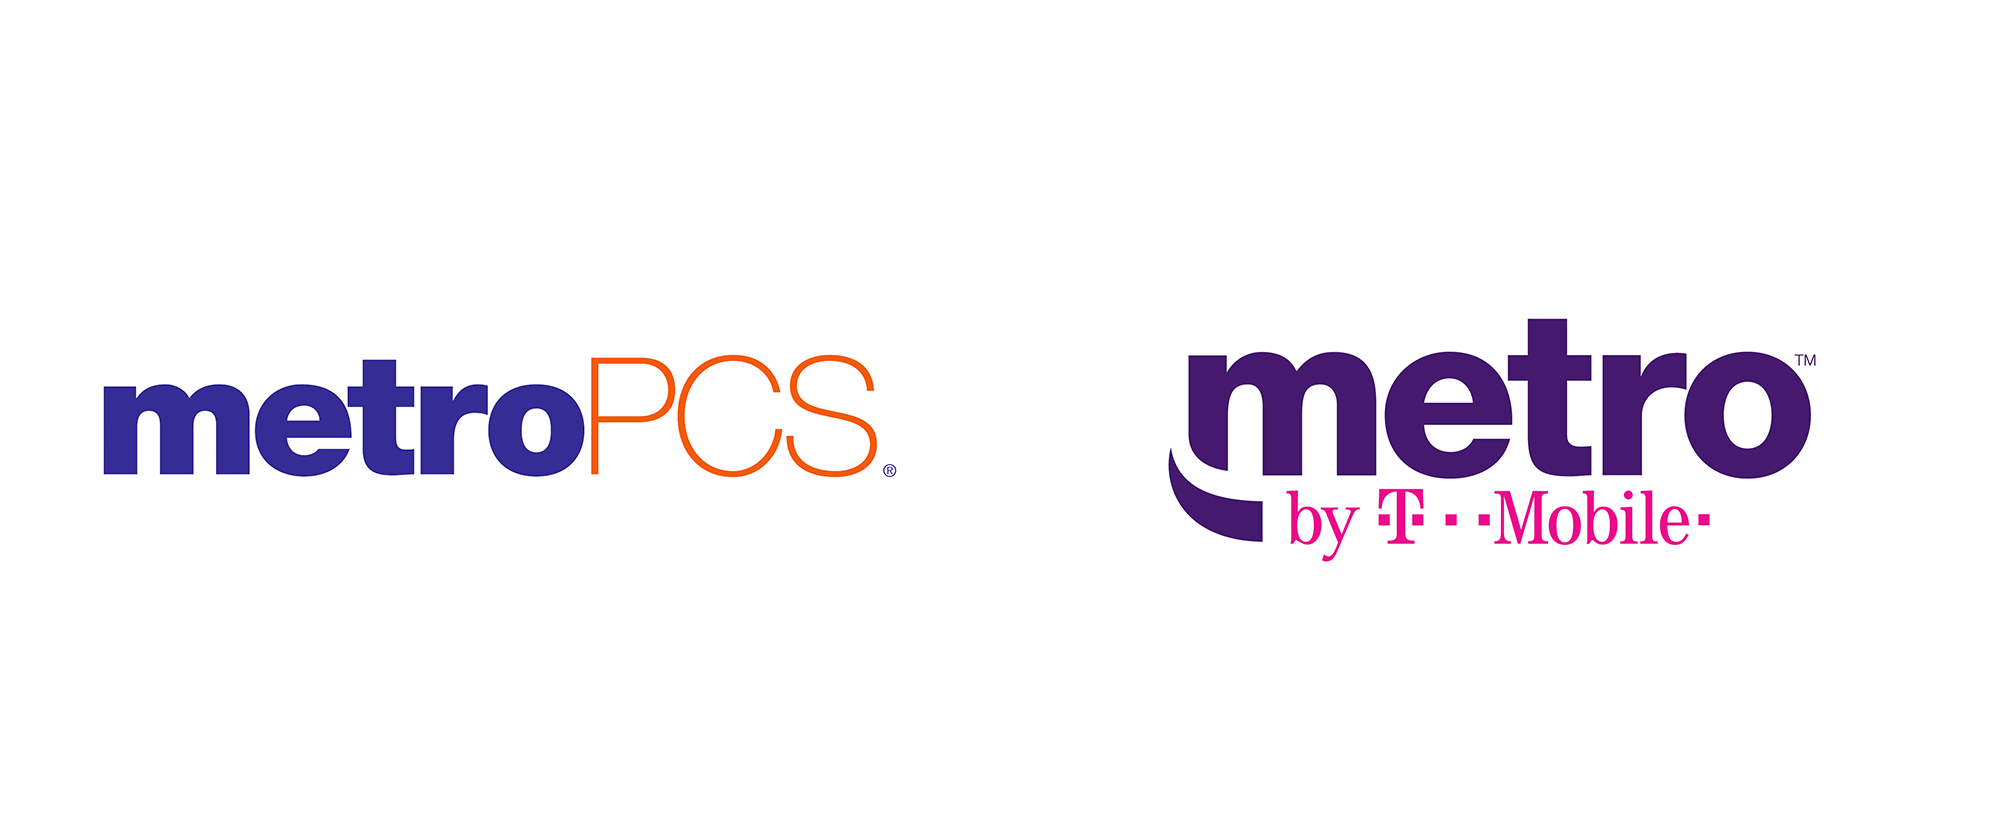 Metro PCS Logo - Brand New: New Name and Logo for Metro by T-Mobile